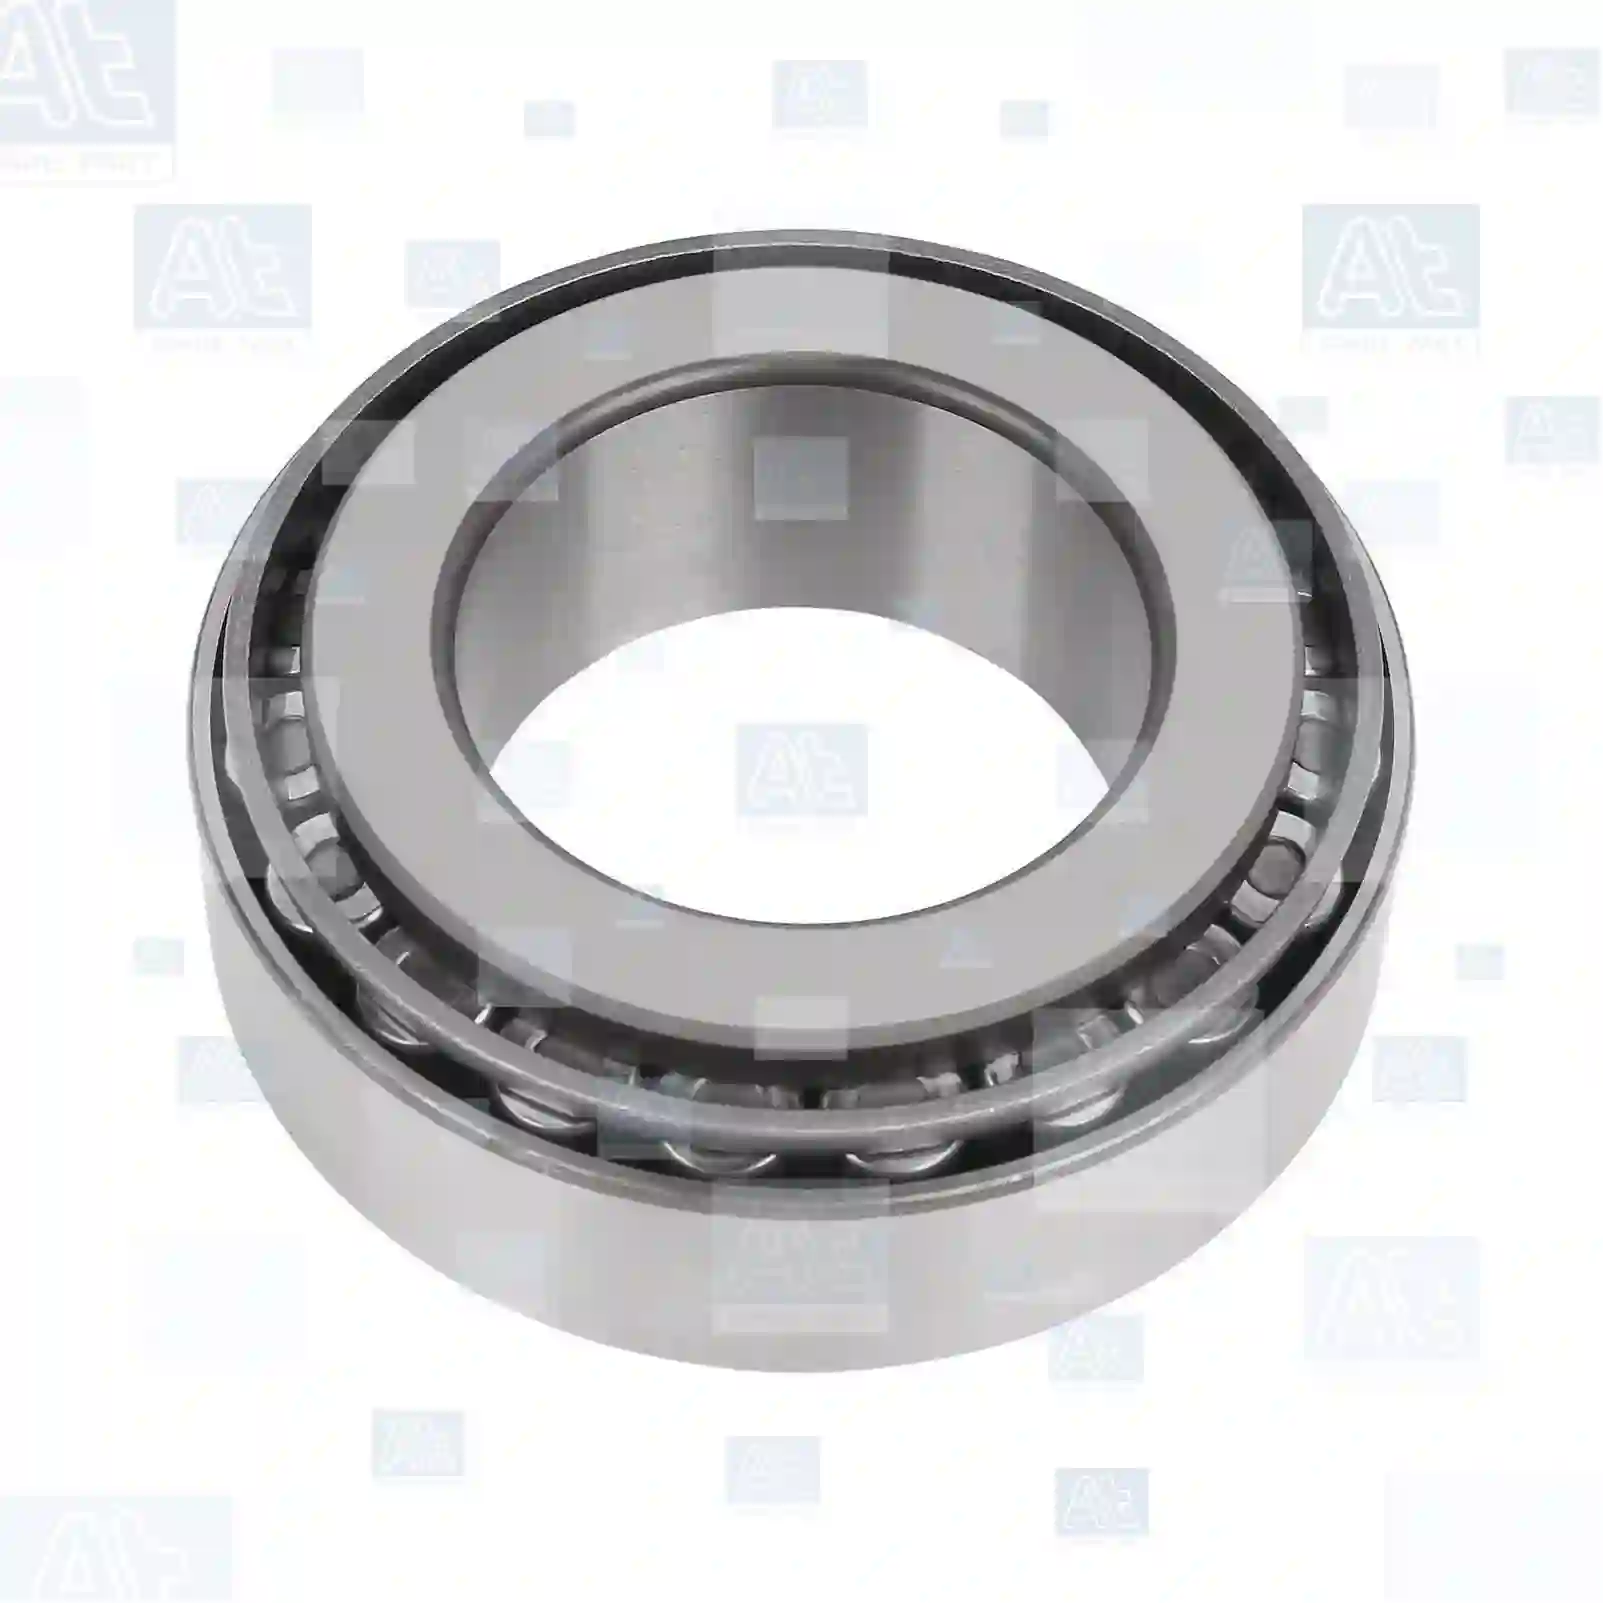 Tapered roller bearing, 77730935, 005090878, 4207540, TK4207540000, 01103142, 10500503, 710500503, 94050722, 988470101, 988470101A, 1-09812058-0, 1-09812062-0, 01103142, 01905296, 1905296, 26800200, 5010439064, 0009819305, 000720033214, 0019818005, 0039815205, 0039815605, 0039818505, 0049817305, 0069815205, 0069816405, 0023336061, 0023336111, 0959232214, 5000470673, 5000470862, 5000609898, 5010136663, 5010439064, 5010596402, 7401524058, 7401654326, 1524058, 1654326, 183279, 2808510 ||  77730935 At Spare Part | Engine, Accelerator Pedal, Camshaft, Connecting Rod, Crankcase, Crankshaft, Cylinder Head, Engine Suspension Mountings, Exhaust Manifold, Exhaust Gas Recirculation, Filter Kits, Flywheel Housing, General Overhaul Kits, Engine, Intake Manifold, Oil Cleaner, Oil Cooler, Oil Filter, Oil Pump, Oil Sump, Piston & Liner, Sensor & Switch, Timing Case, Turbocharger, Cooling System, Belt Tensioner, Coolant Filter, Coolant Pipe, Corrosion Prevention Agent, Drive, Expansion Tank, Fan, Intercooler, Monitors & Gauges, Radiator, Thermostat, V-Belt / Timing belt, Water Pump, Fuel System, Electronical Injector Unit, Feed Pump, Fuel Filter, cpl., Fuel Gauge Sender,  Fuel Line, Fuel Pump, Fuel Tank, Injection Line Kit, Injection Pump, Exhaust System, Clutch & Pedal, Gearbox, Propeller Shaft, Axles, Brake System, Hubs & Wheels, Suspension, Leaf Spring, Universal Parts / Accessories, Steering, Electrical System, Cabin Tapered roller bearing, 77730935, 005090878, 4207540, TK4207540000, 01103142, 10500503, 710500503, 94050722, 988470101, 988470101A, 1-09812058-0, 1-09812062-0, 01103142, 01905296, 1905296, 26800200, 5010439064, 0009819305, 000720033214, 0019818005, 0039815205, 0039815605, 0039818505, 0049817305, 0069815205, 0069816405, 0023336061, 0023336111, 0959232214, 5000470673, 5000470862, 5000609898, 5010136663, 5010439064, 5010596402, 7401524058, 7401654326, 1524058, 1654326, 183279, 2808510 ||  77730935 At Spare Part | Engine, Accelerator Pedal, Camshaft, Connecting Rod, Crankcase, Crankshaft, Cylinder Head, Engine Suspension Mountings, Exhaust Manifold, Exhaust Gas Recirculation, Filter Kits, Flywheel Housing, General Overhaul Kits, Engine, Intake Manifold, Oil Cleaner, Oil Cooler, Oil Filter, Oil Pump, Oil Sump, Piston & Liner, Sensor & Switch, Timing Case, Turbocharger, Cooling System, Belt Tensioner, Coolant Filter, Coolant Pipe, Corrosion Prevention Agent, Drive, Expansion Tank, Fan, Intercooler, Monitors & Gauges, Radiator, Thermostat, V-Belt / Timing belt, Water Pump, Fuel System, Electronical Injector Unit, Feed Pump, Fuel Filter, cpl., Fuel Gauge Sender,  Fuel Line, Fuel Pump, Fuel Tank, Injection Line Kit, Injection Pump, Exhaust System, Clutch & Pedal, Gearbox, Propeller Shaft, Axles, Brake System, Hubs & Wheels, Suspension, Leaf Spring, Universal Parts / Accessories, Steering, Electrical System, Cabin